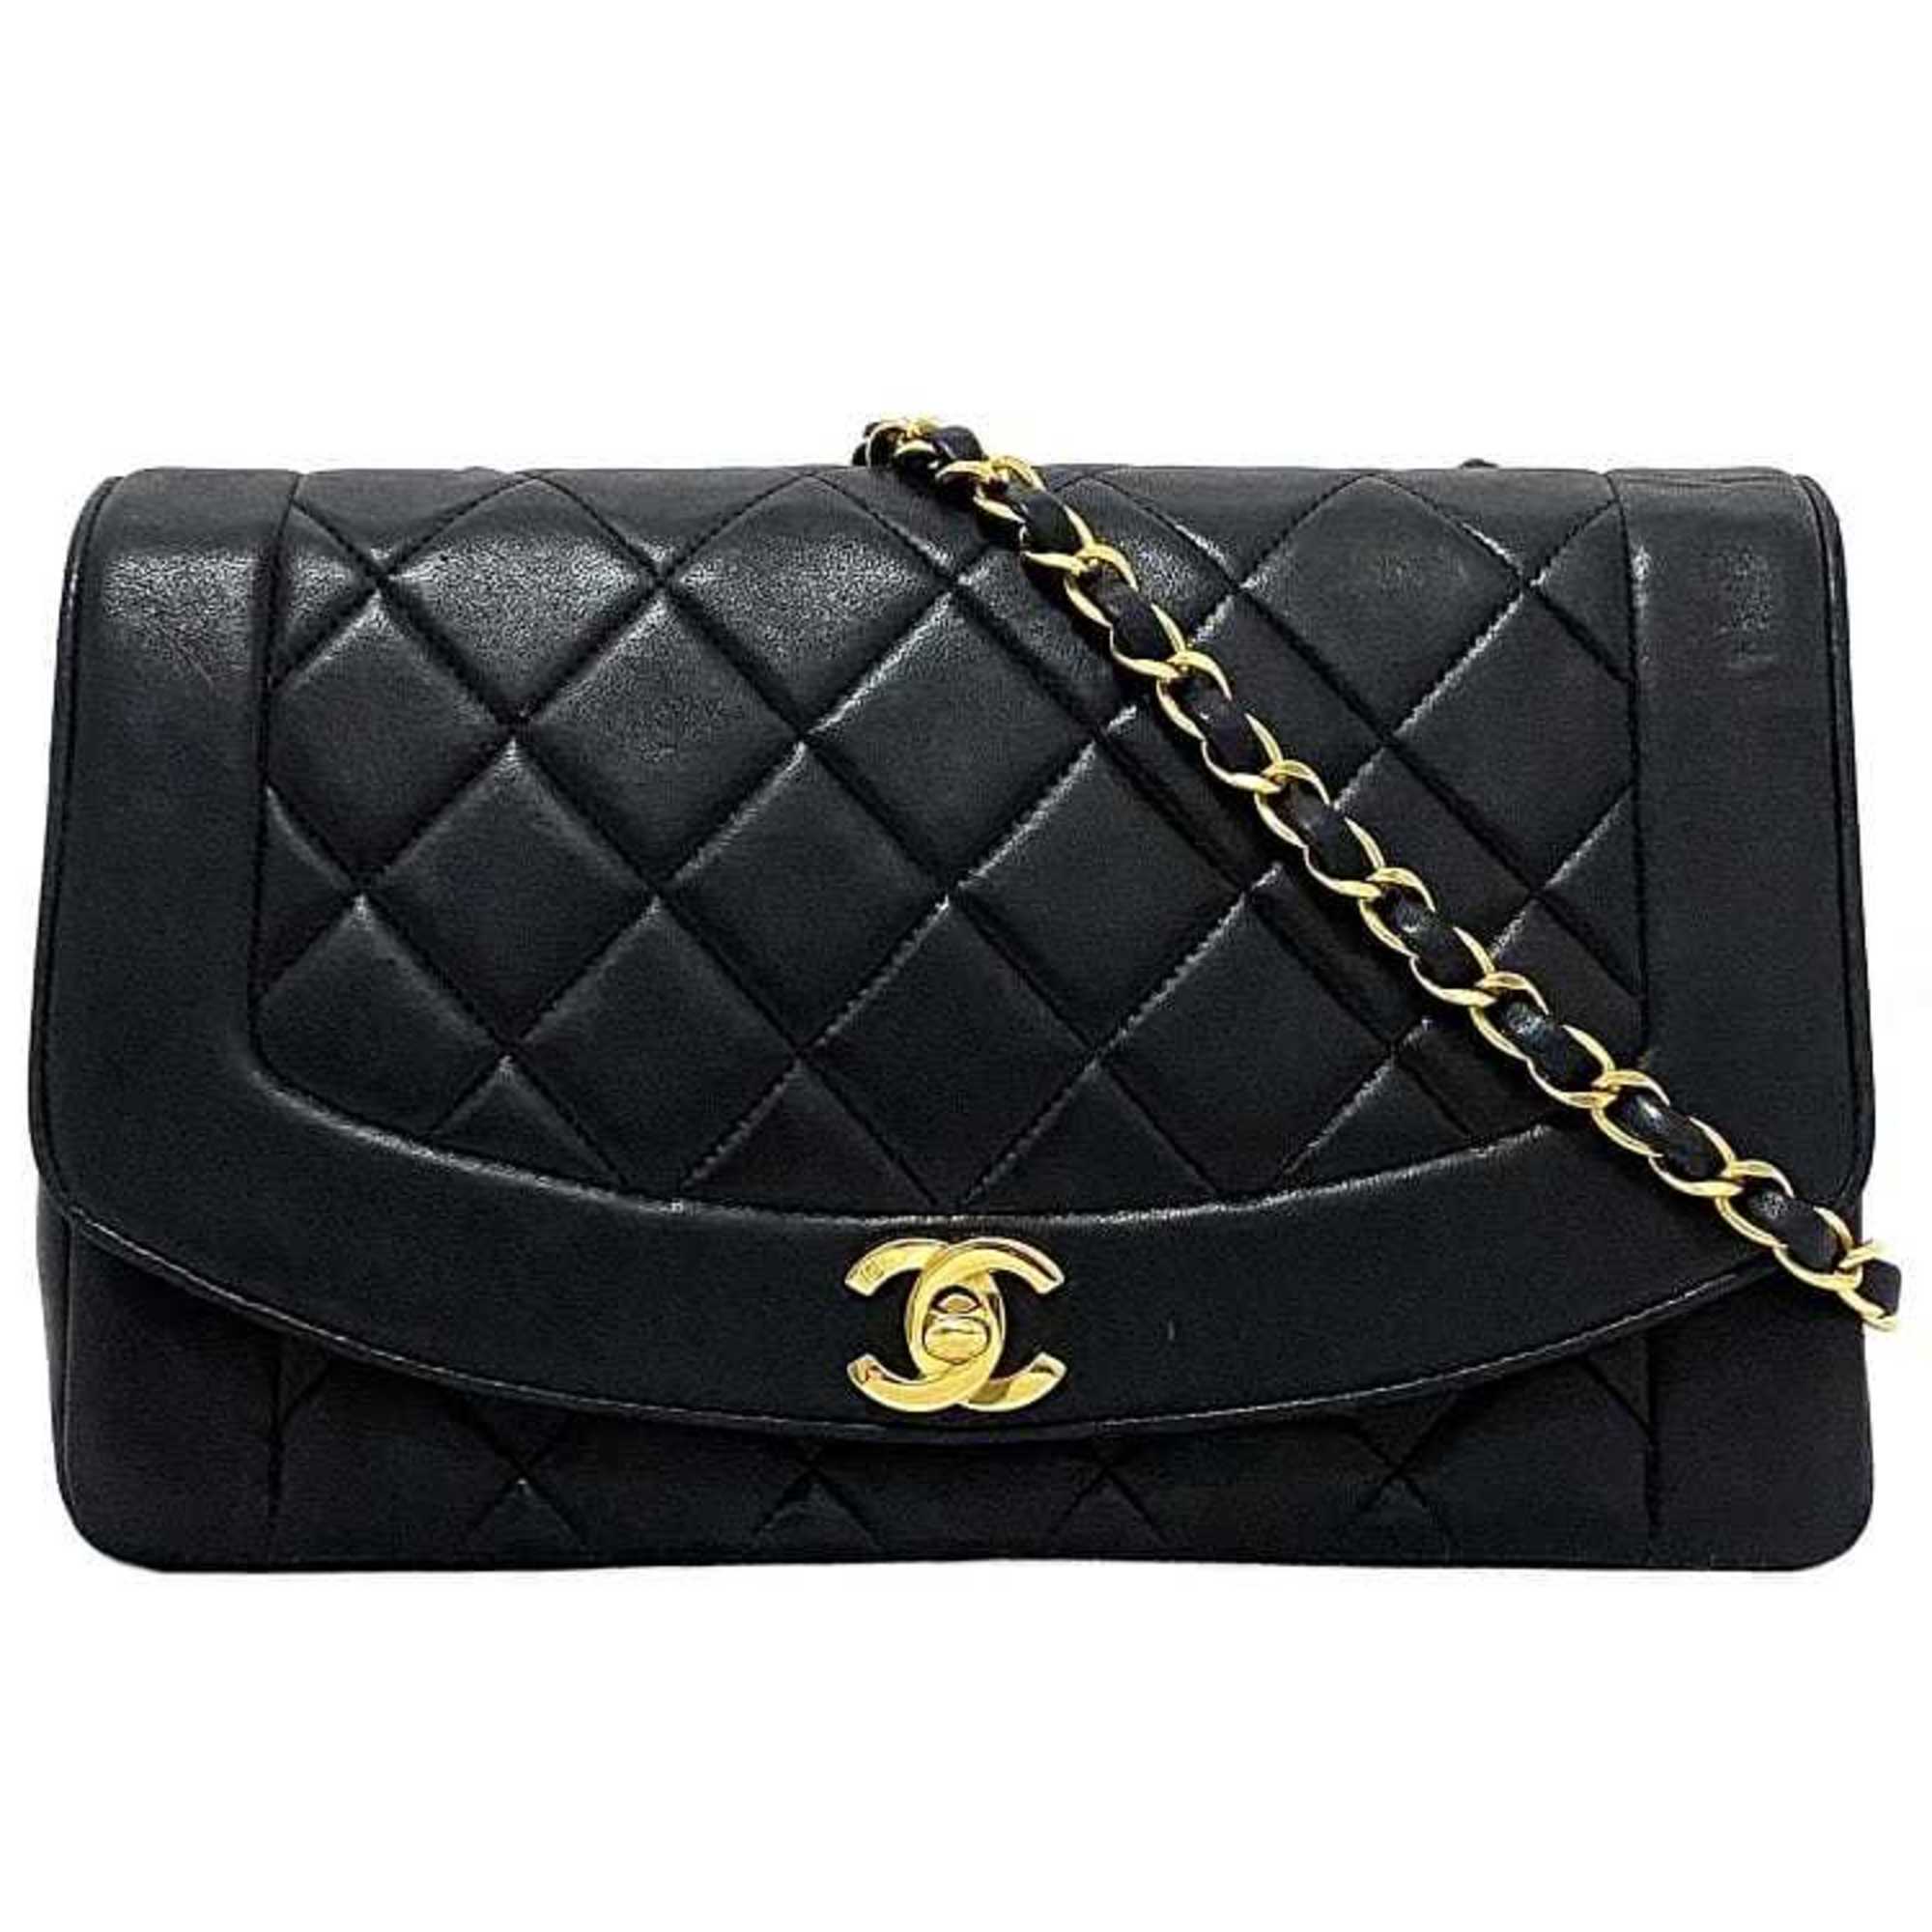 Chanel Diana Black Leather Shopper Bag (Pre-Owned)